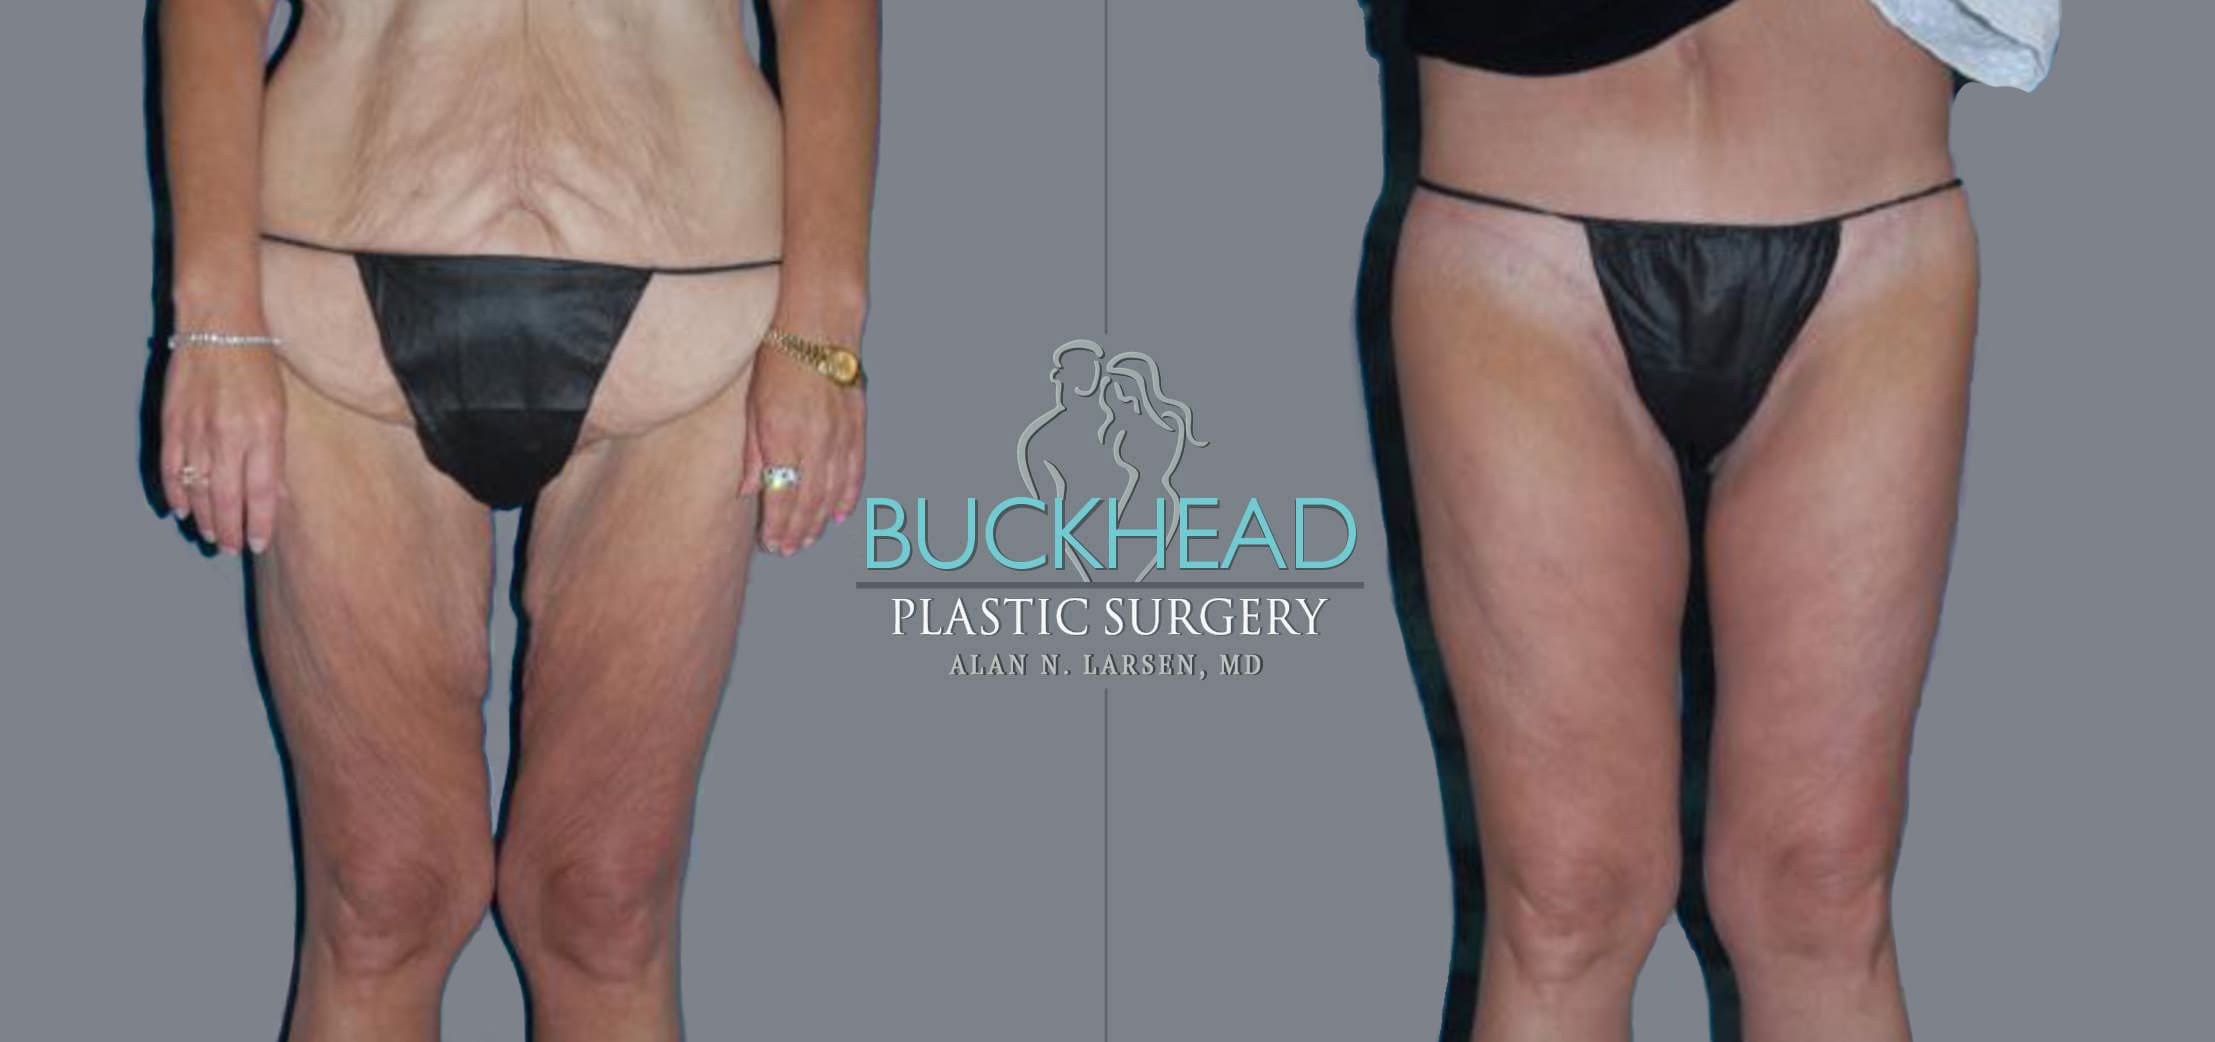 LUX Med Spa at Before and After Photo Gallery | Thigh Lift | Buckhead Plastic Surgery | Alan N. Larsen, MD | Board-Certified Plastic Surgeon | Atlanta GA